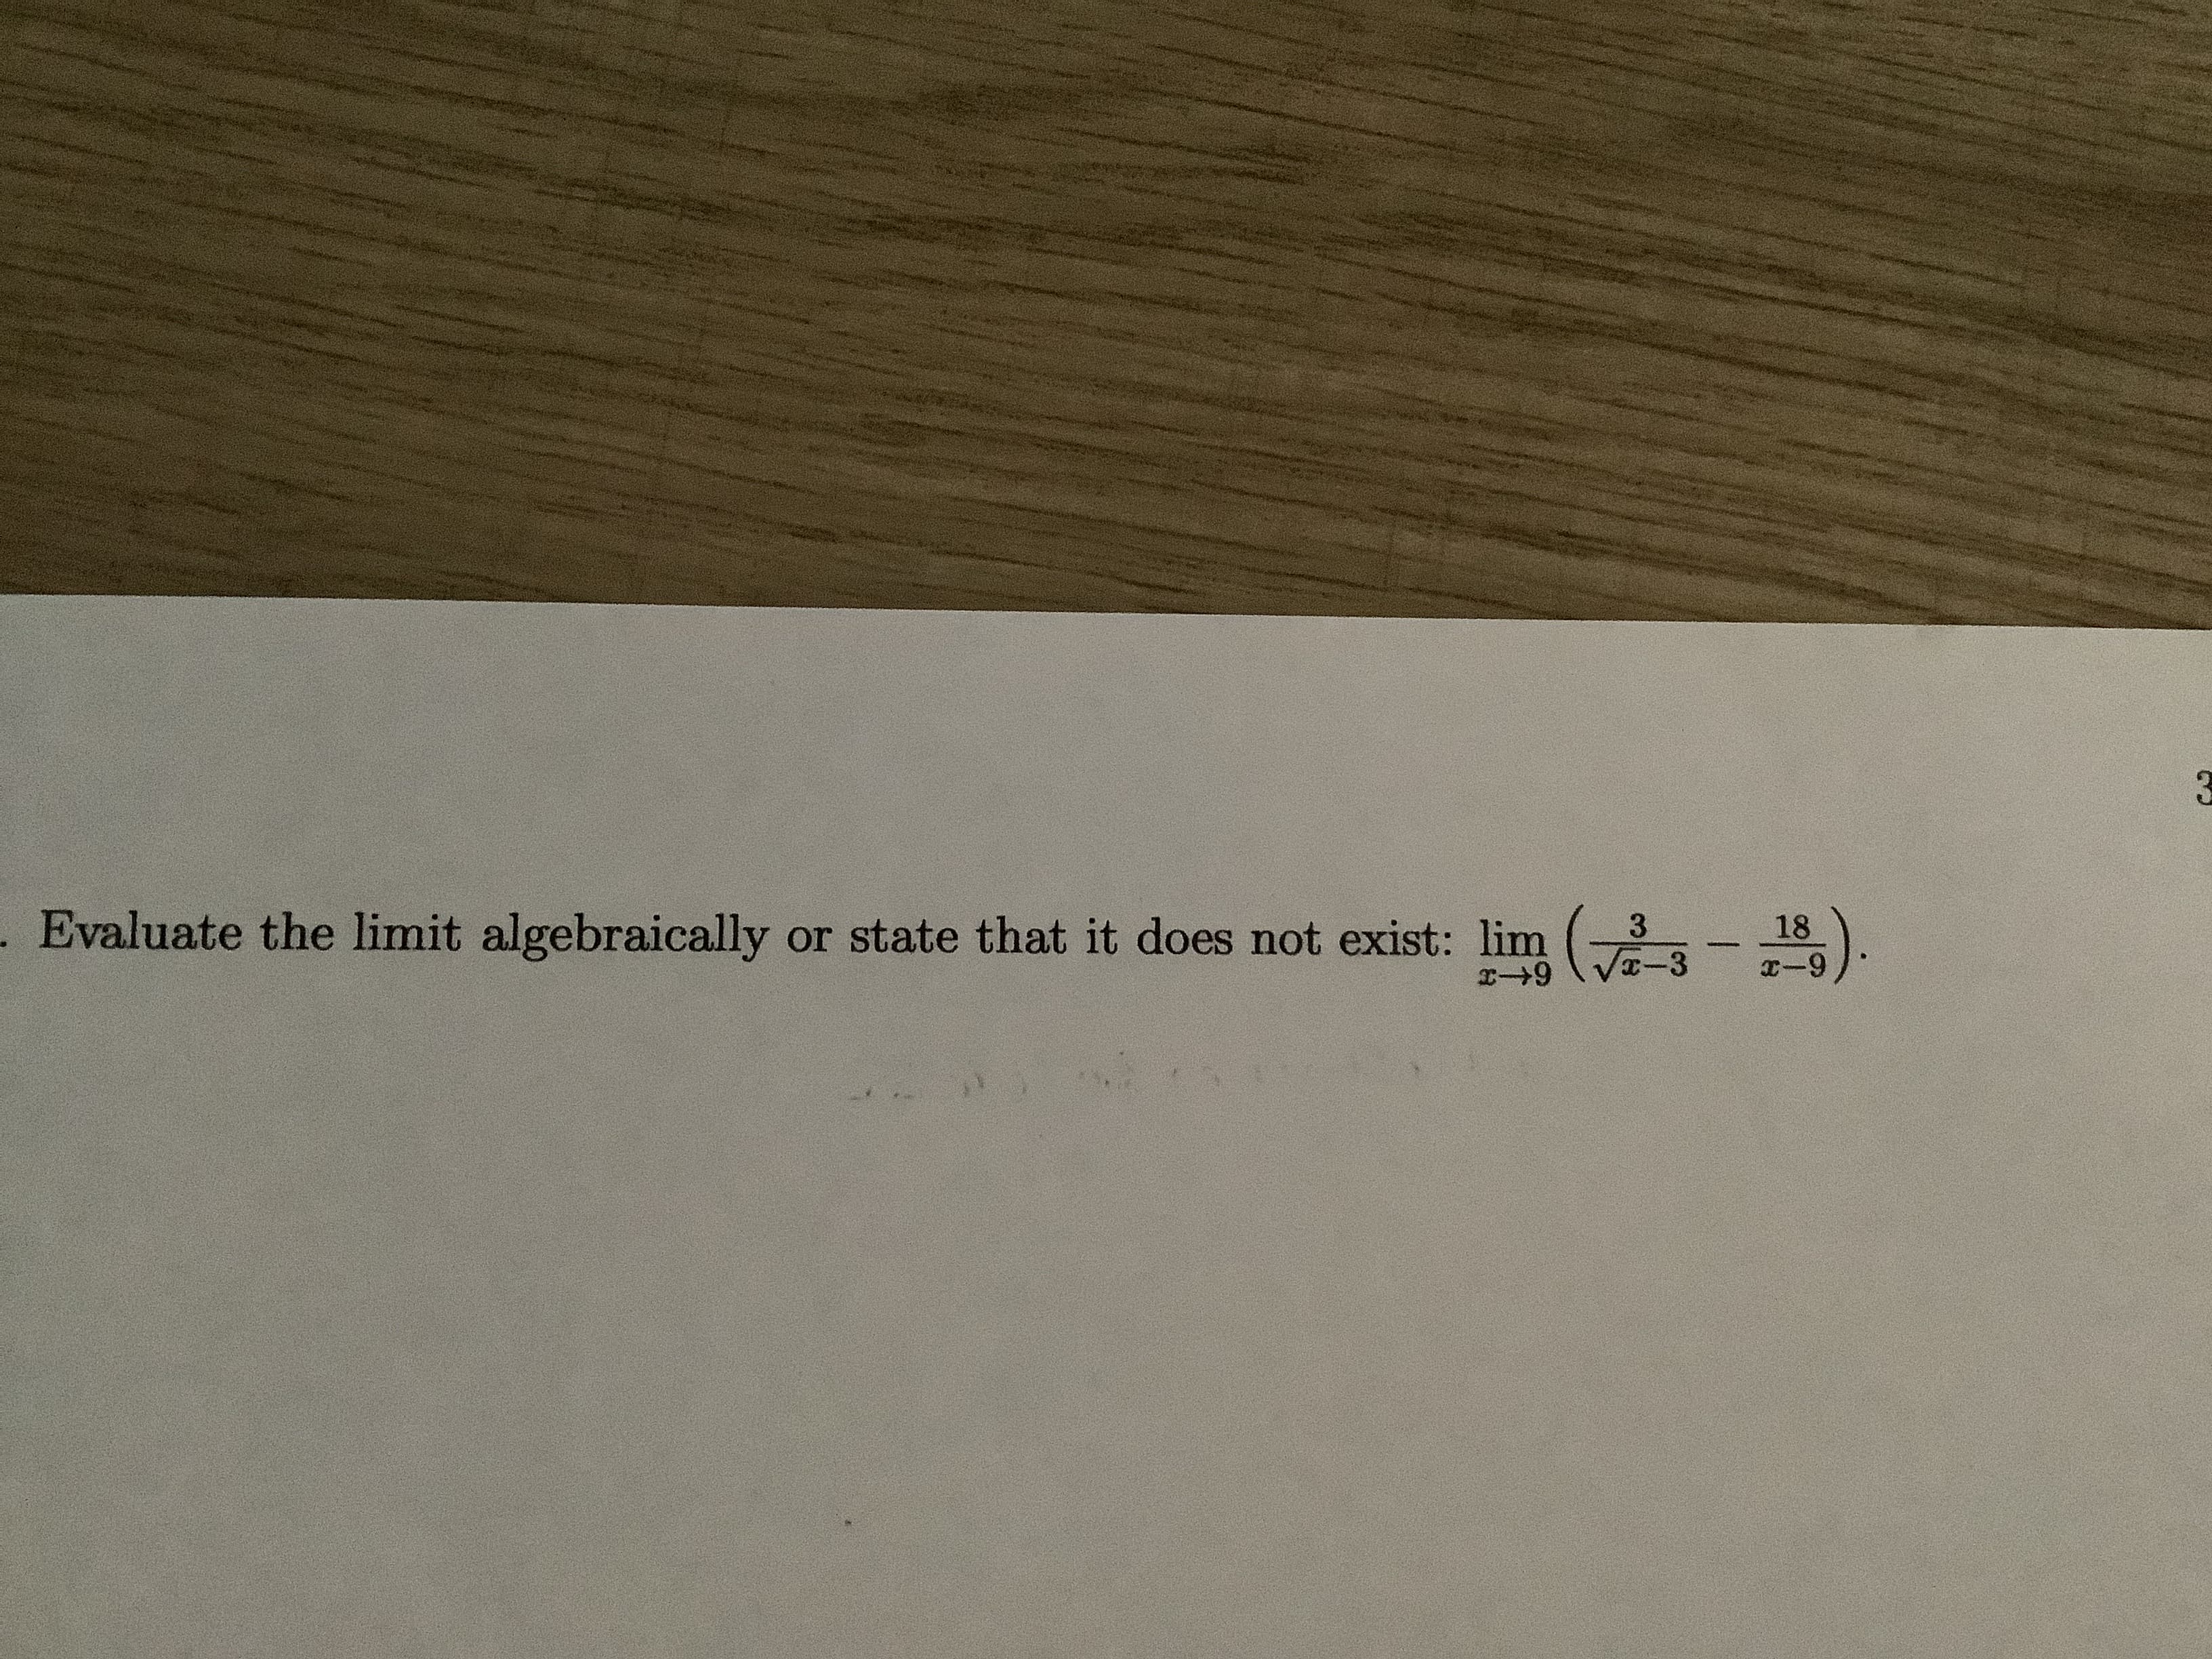 Evaluate the limit algebraically or state that it does not exist: lim (,
3
18
Vな-3
6个8
